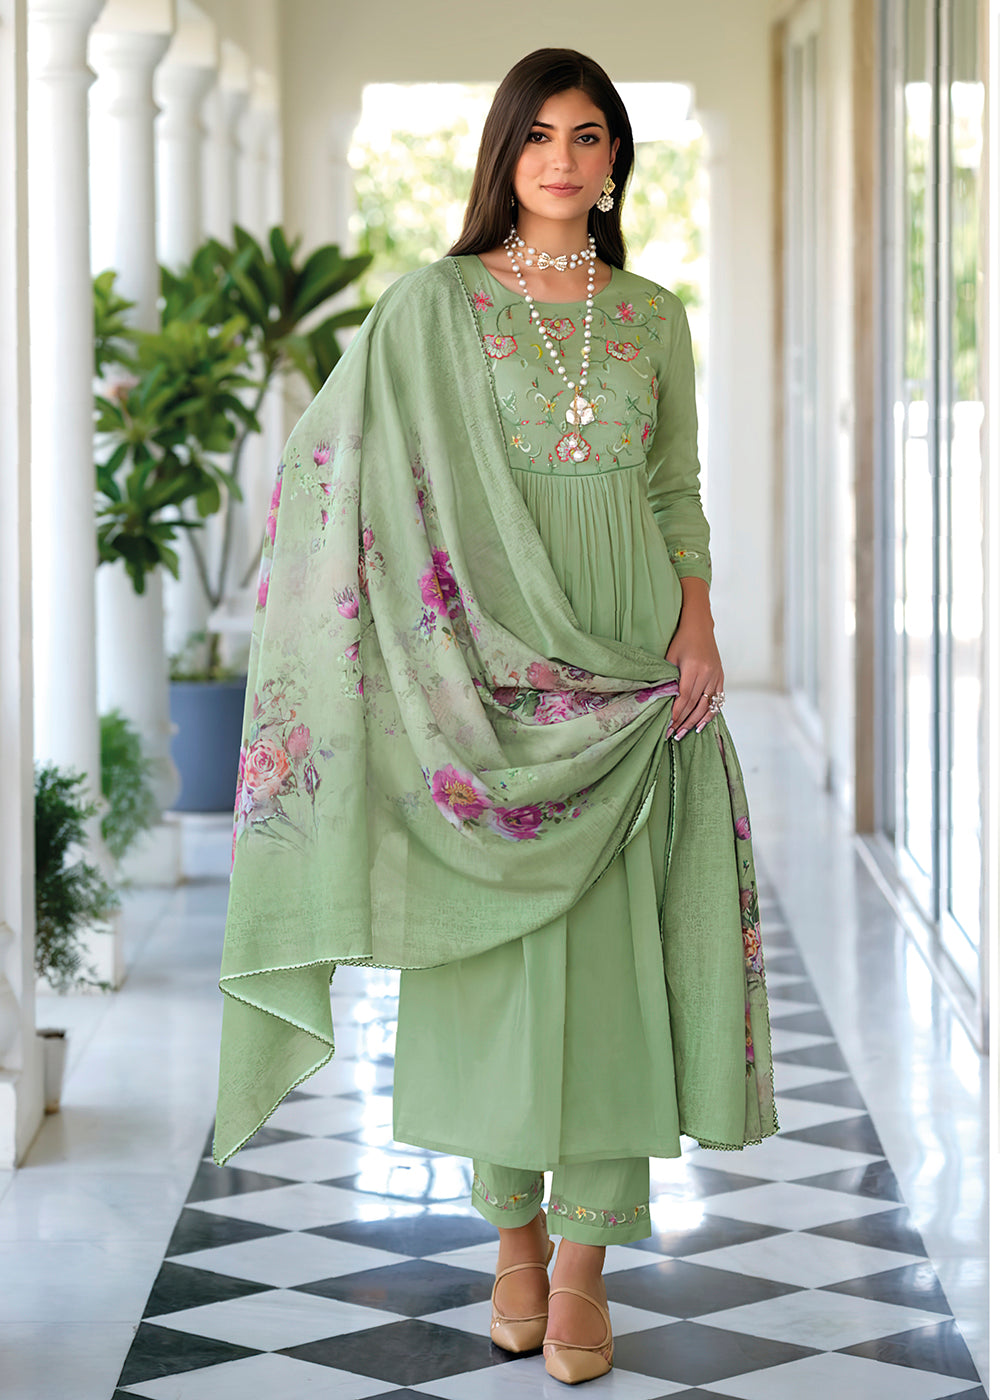 Buy Now Graceful Green Mal Mal Cotton Salwar Suit Online in USA, UK, Canada, Germany, Australia & Worldwide at Empress Clothing.